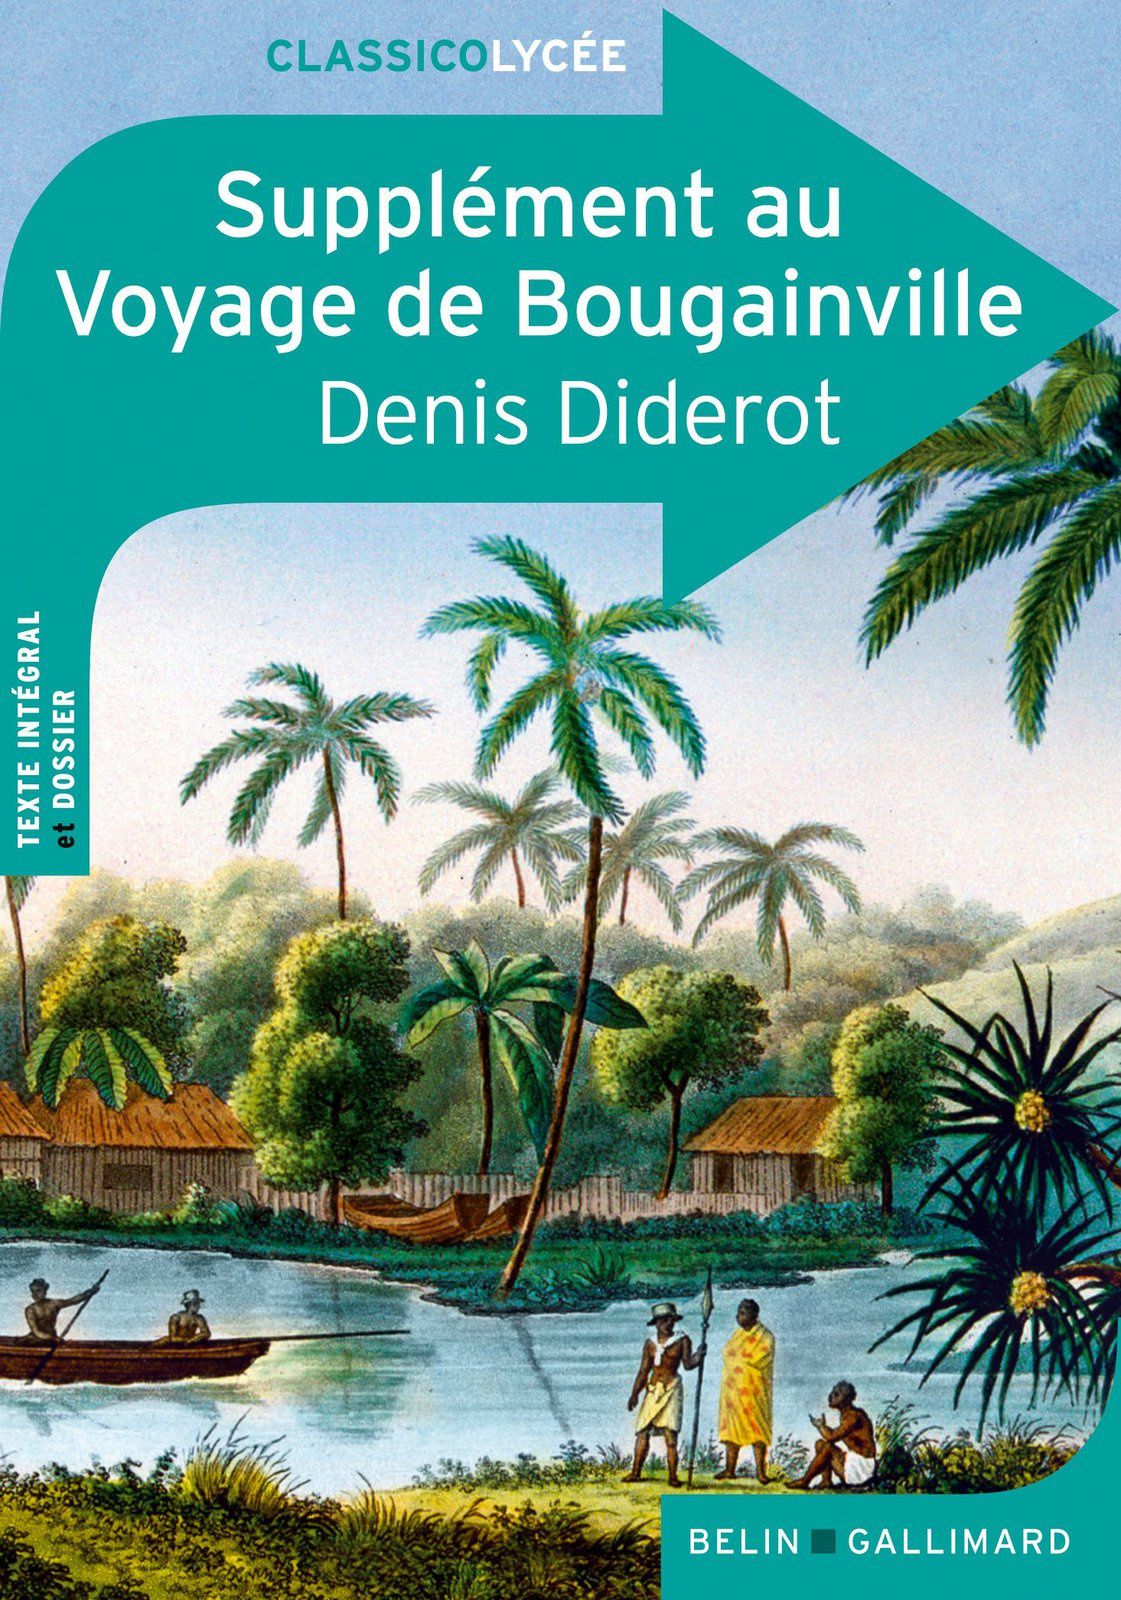 supplement to bougainville's voyage discussion questions